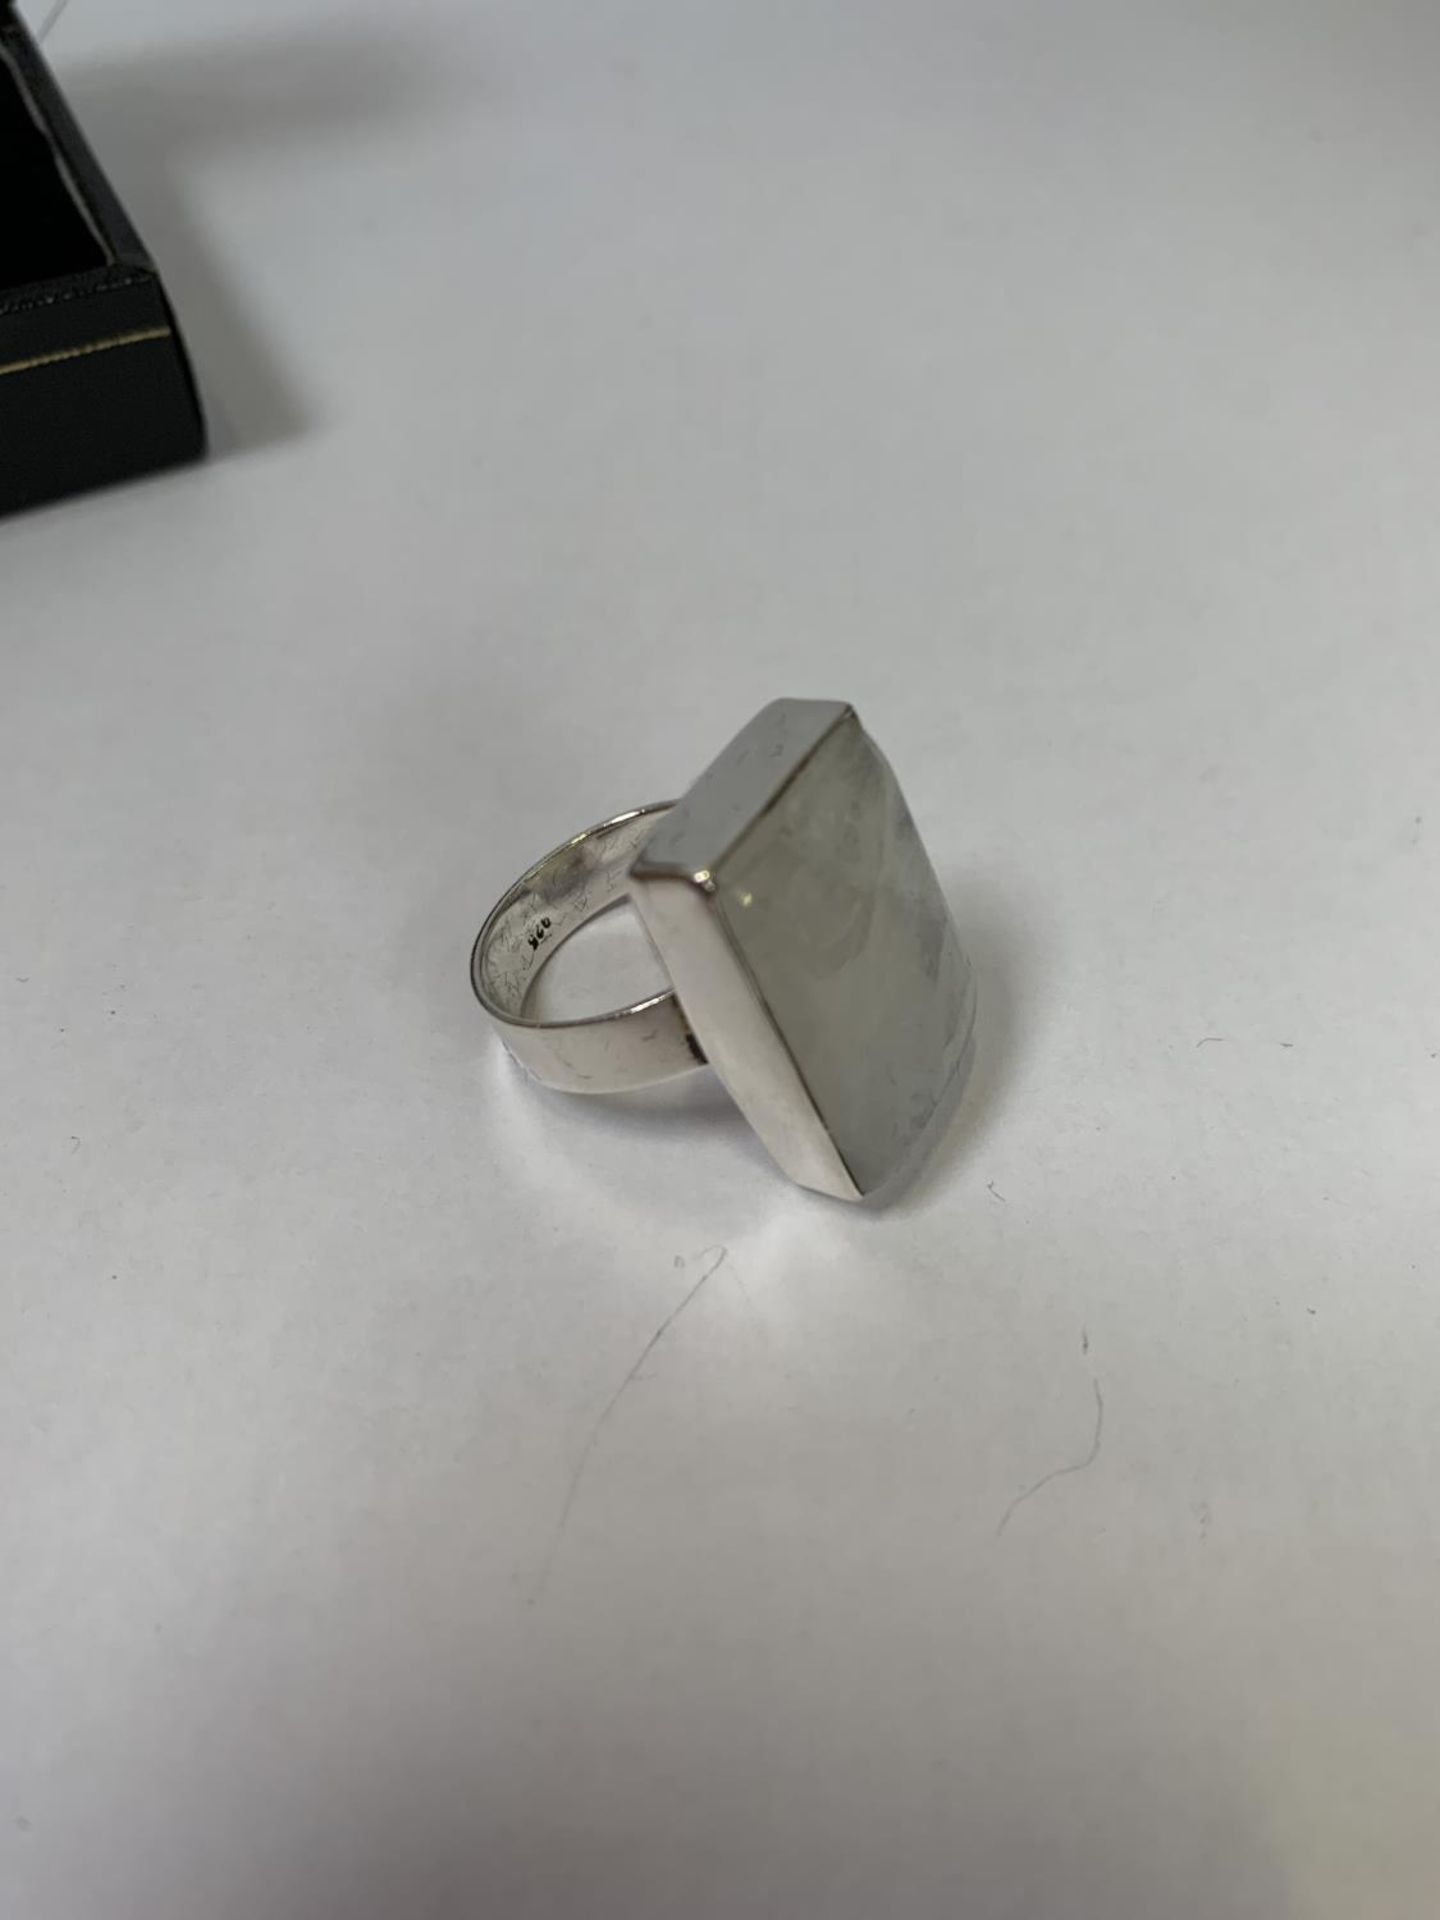 A SILVER AGATE OBLONG STONE RING - Image 2 of 2